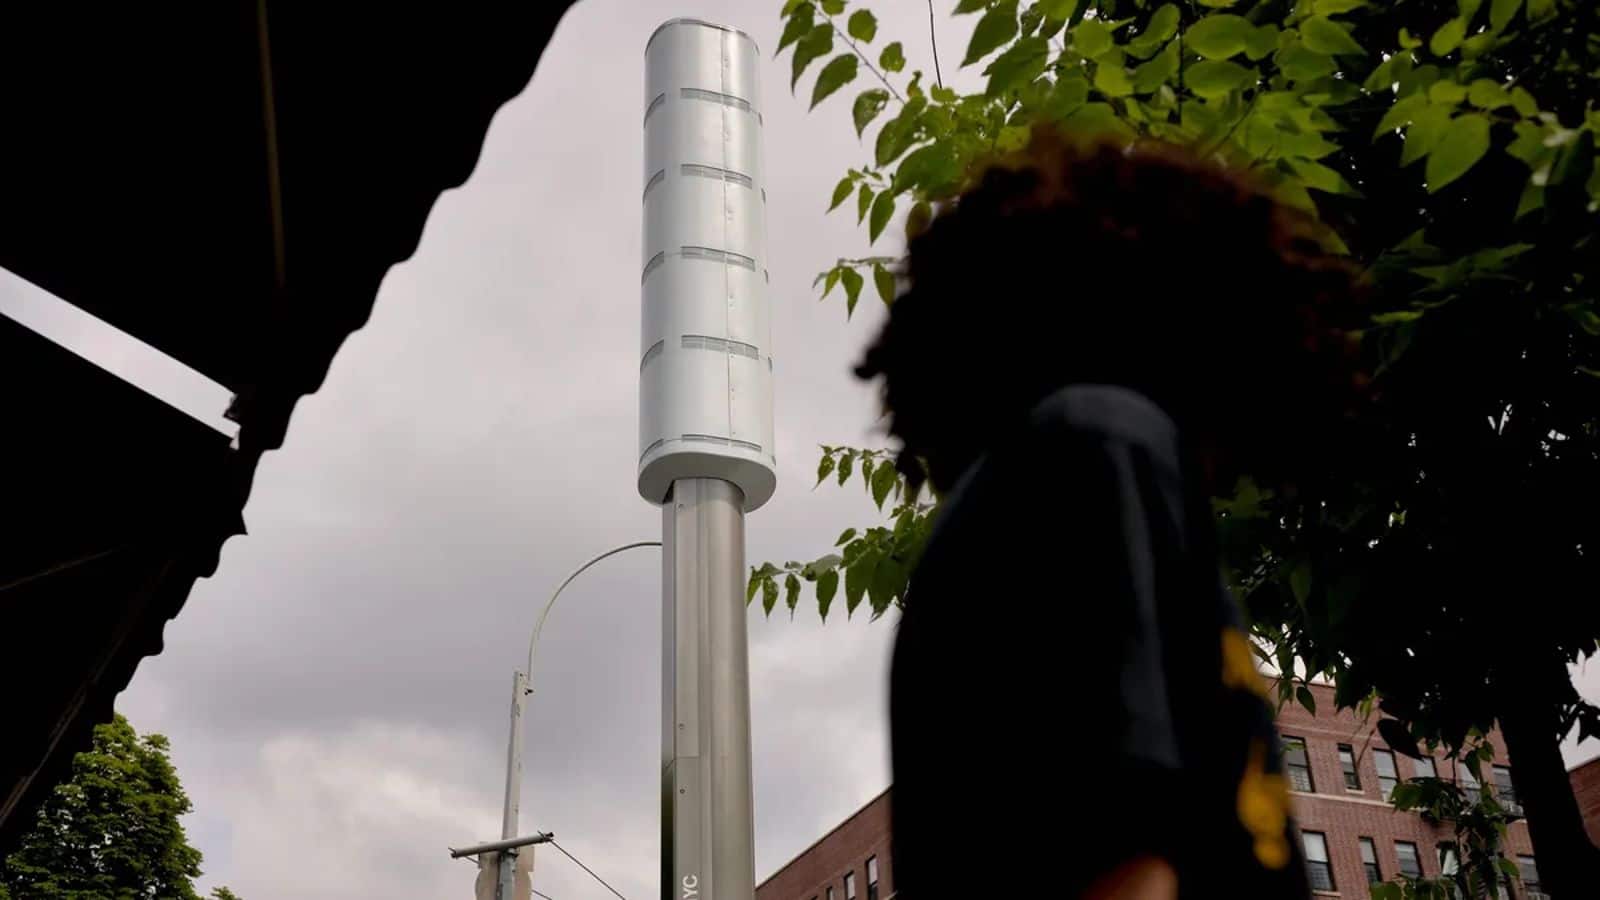 Mini 5G towers could solve your smartphone battery woes: Research